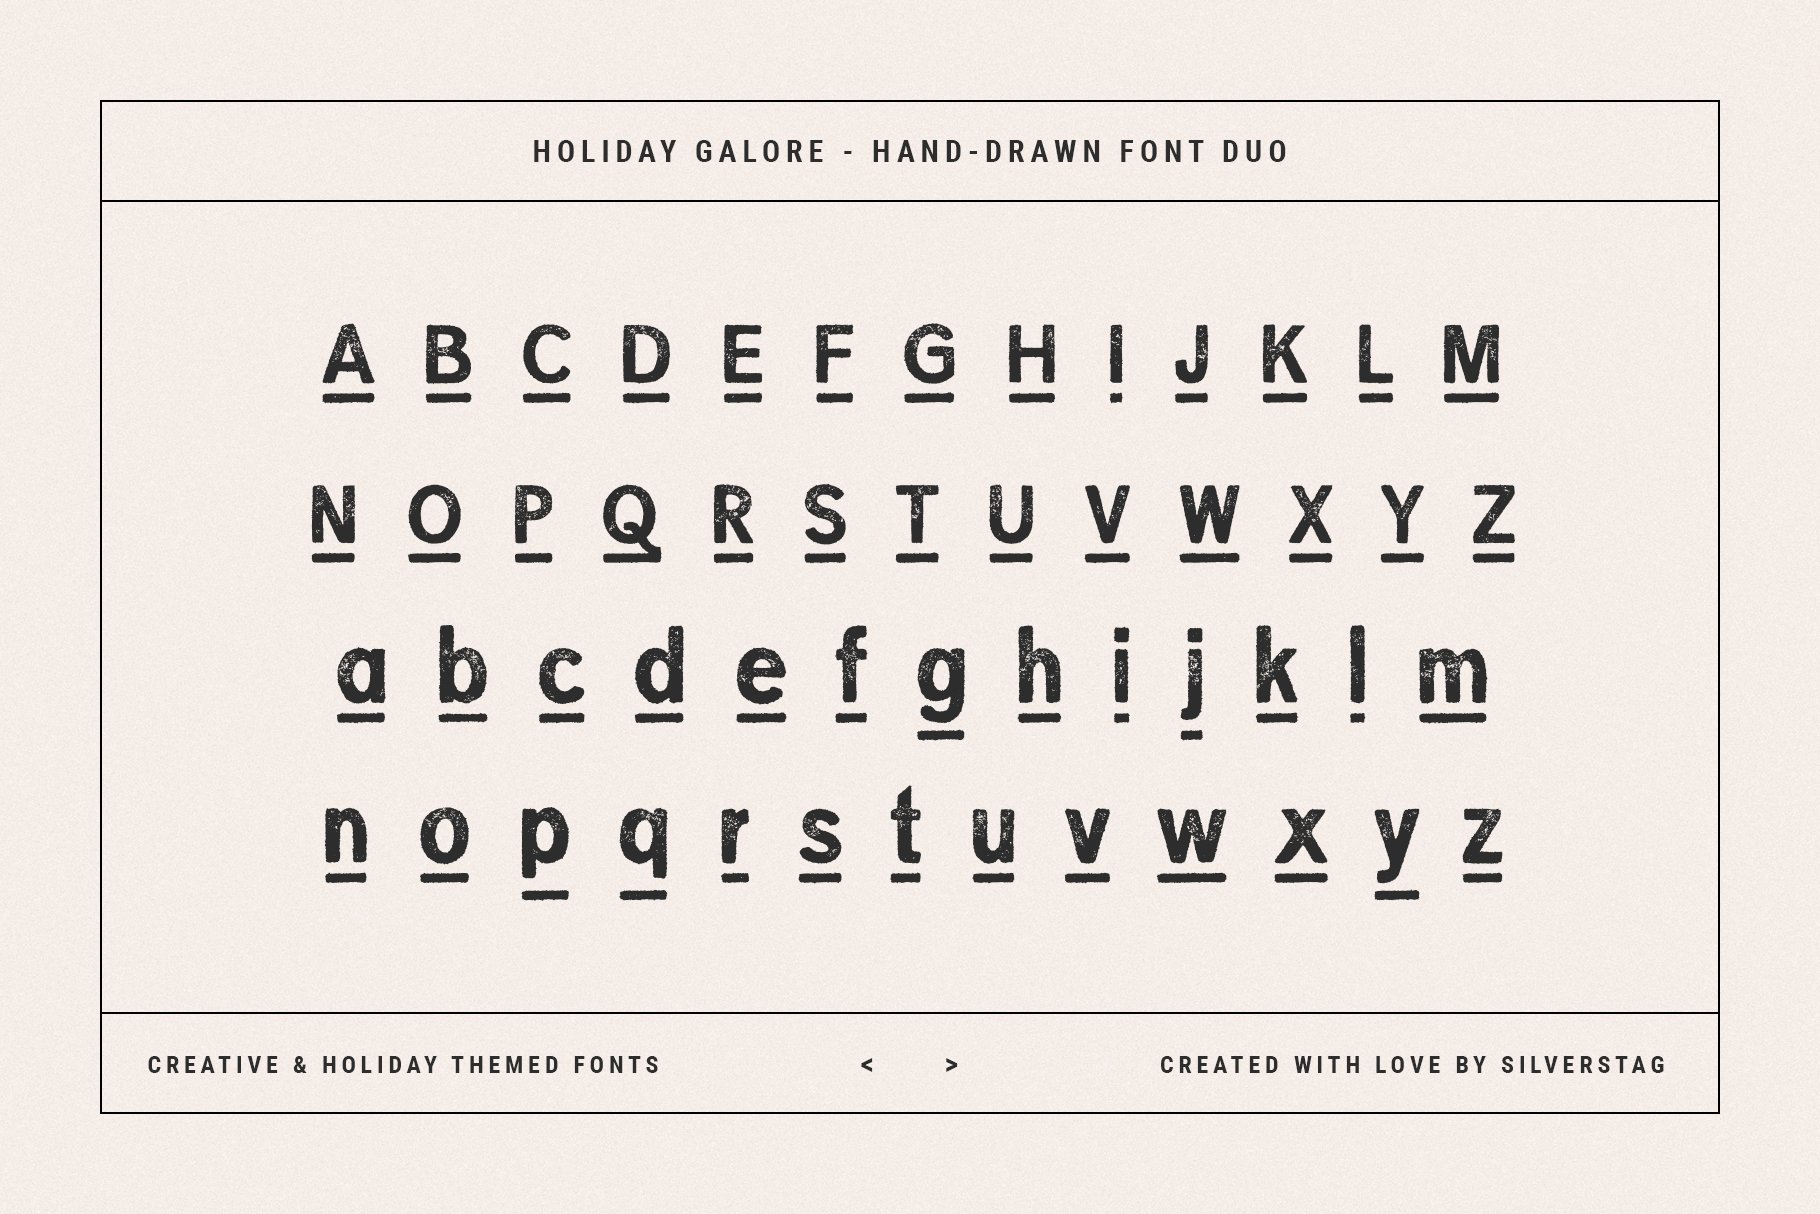 32 holiday galore font duo by silver stag 374